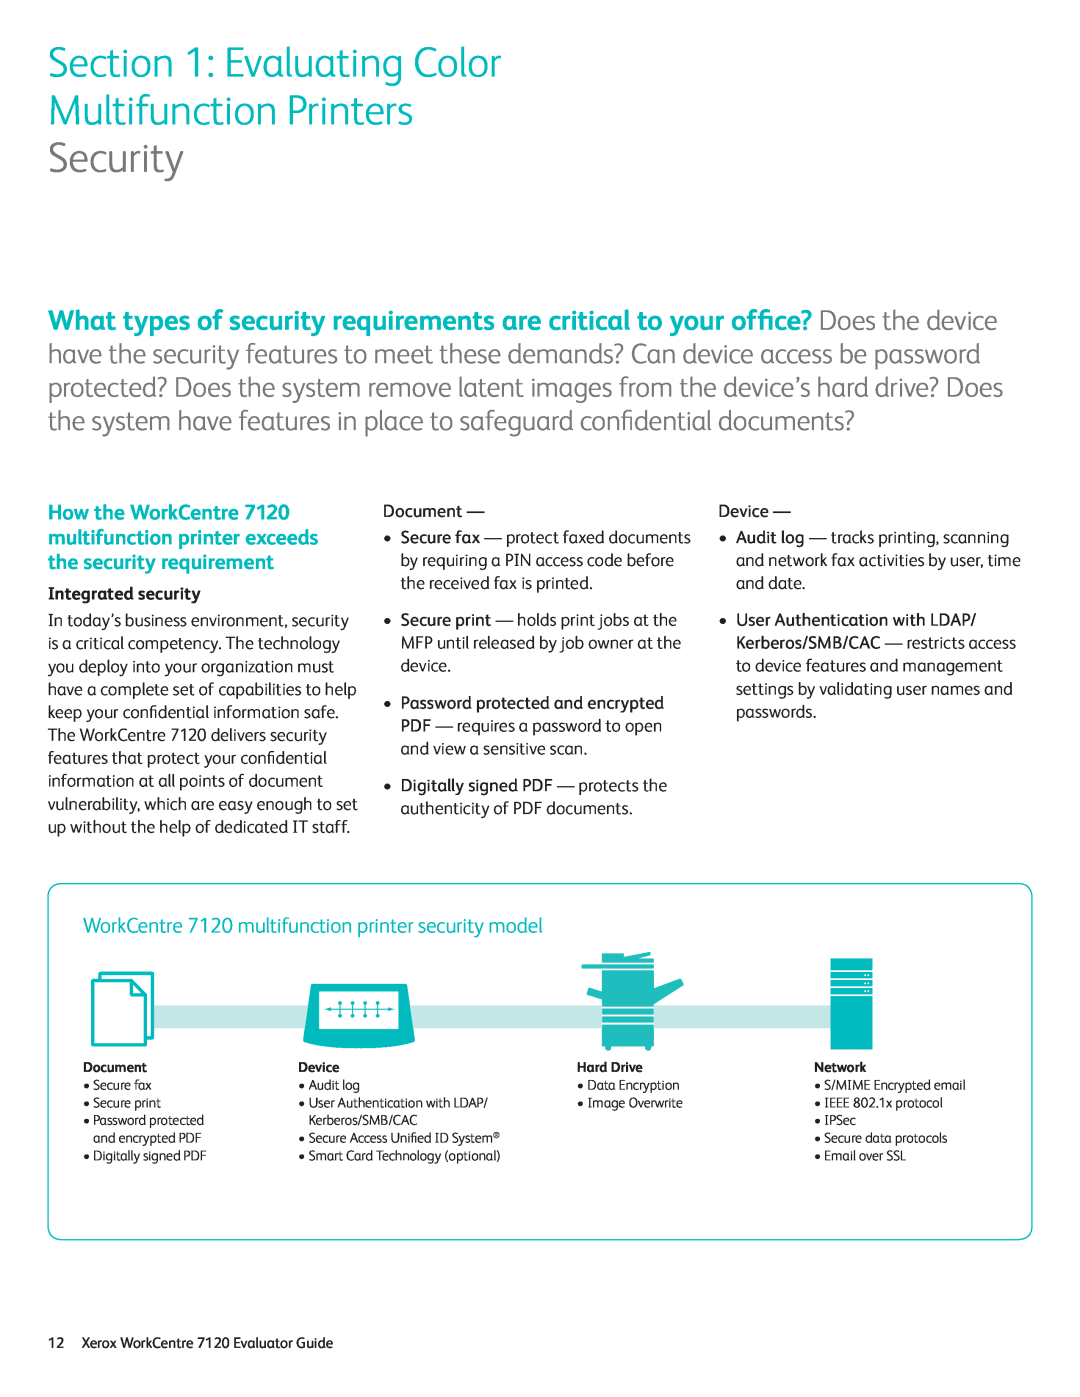 Xerox manual Security, WorkCentre 7120 multifunction printer security model, Integrated security 